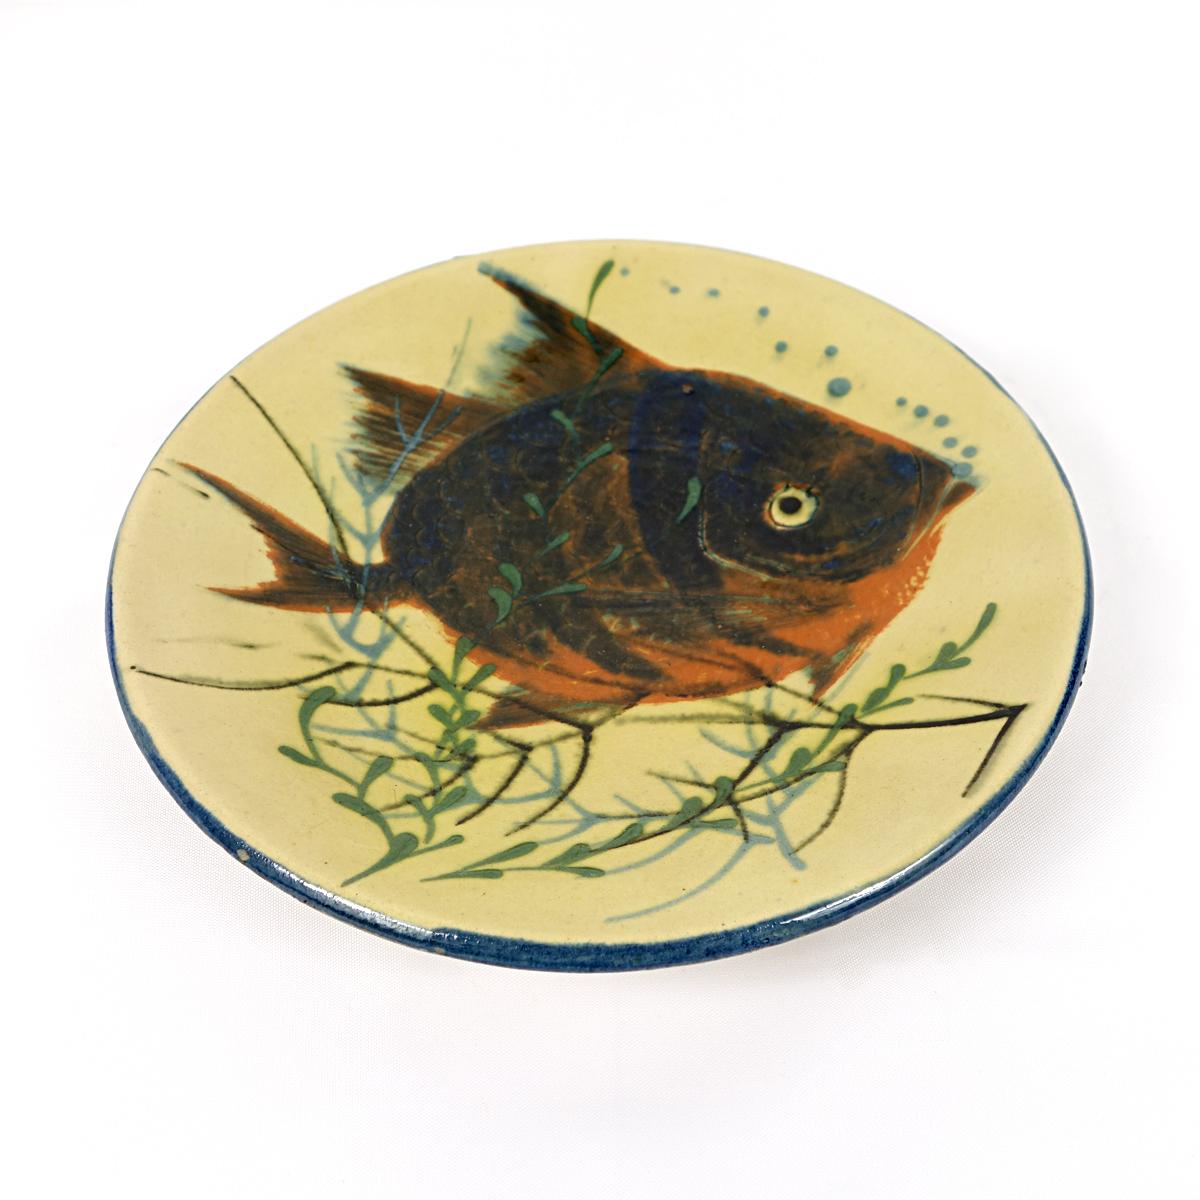 20th Century Set of 3 Ceramic Wall Plates with Fish Decor Signed by Spanish Maker Puigdemont For Sale